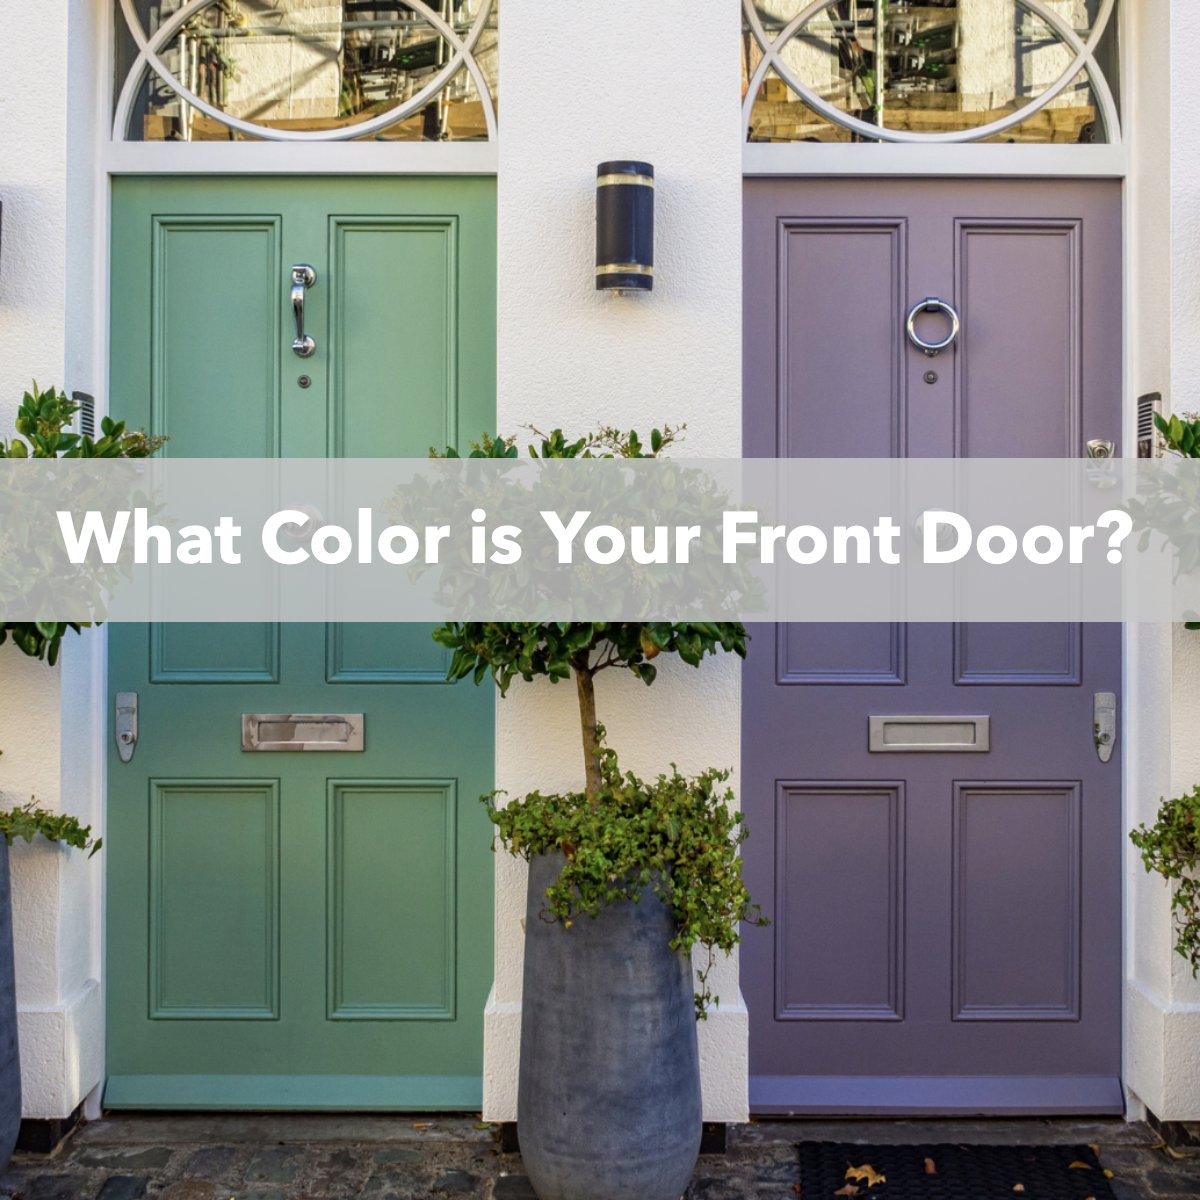 Did you select the color or did you just settle? 🤔

Tell us in the comments! 👇 

#questions #frontdoor #doorcolor #exterior #realestate
 #chadwickknight #realtor #realestate #floridarealtor #floridarealestate #mvprealty #realestateadvisor #homesforsale #property